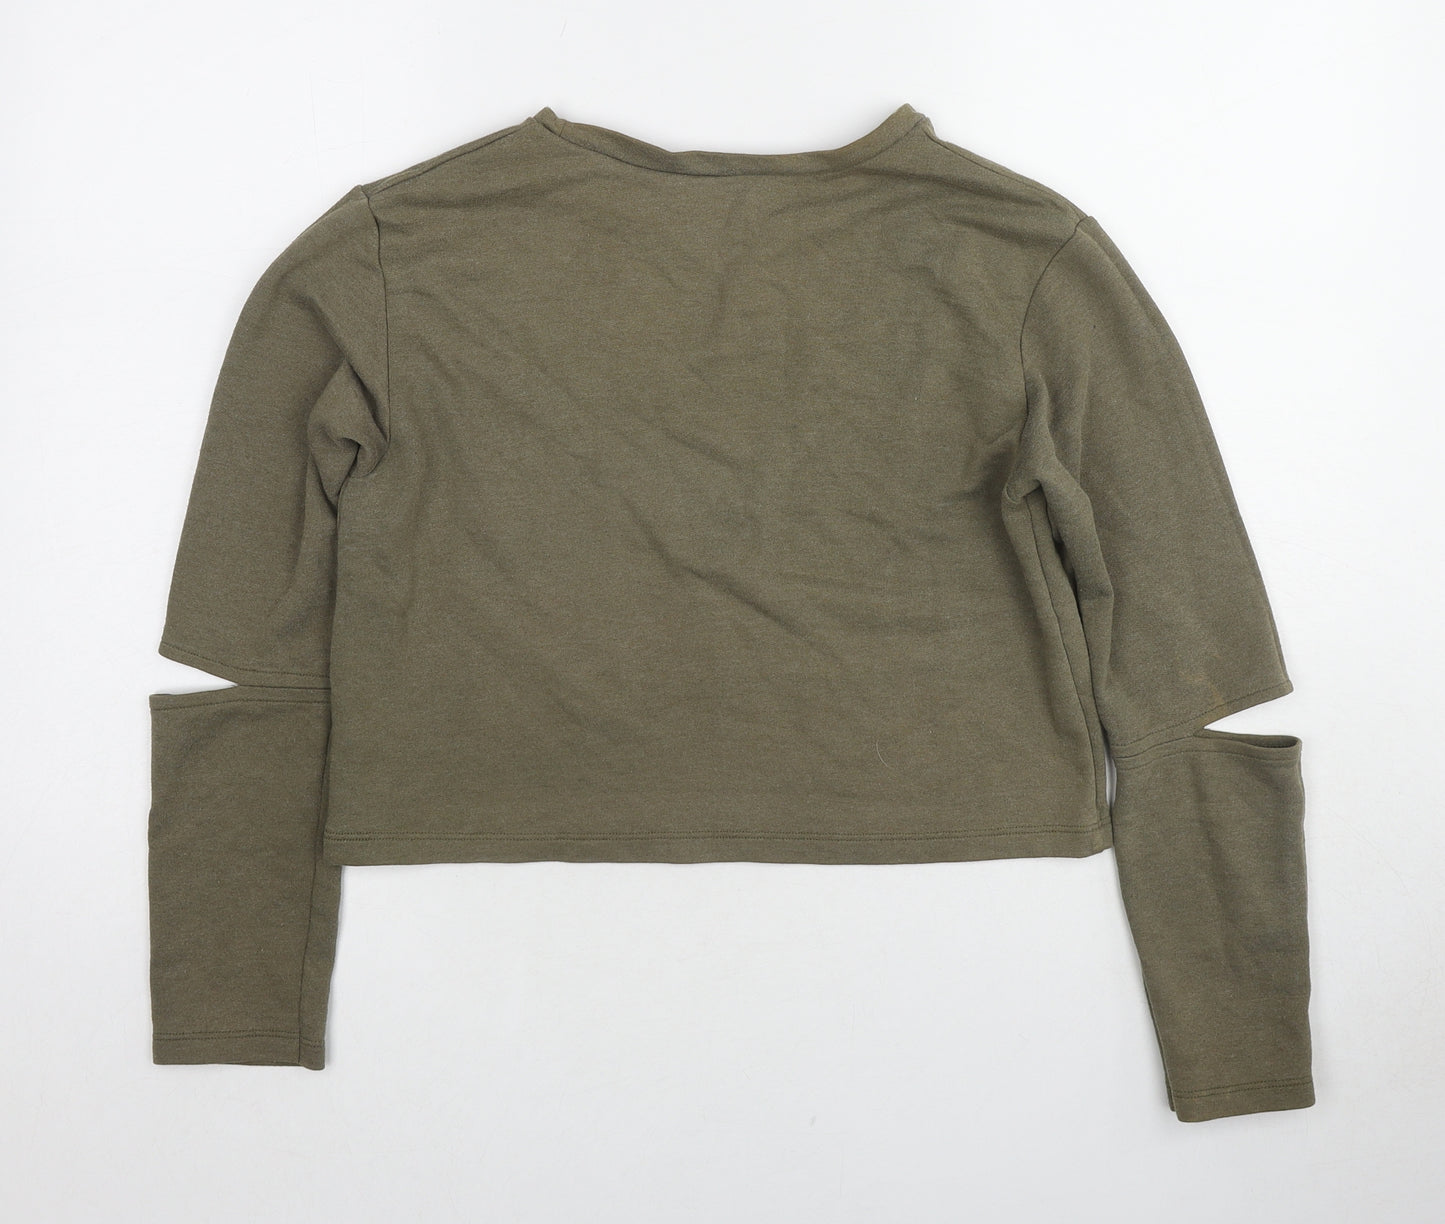 Kalestesia Womens Green Cotton Pullover Sweatshirt Size M Pullover - Cut Out Detail On Sleeves